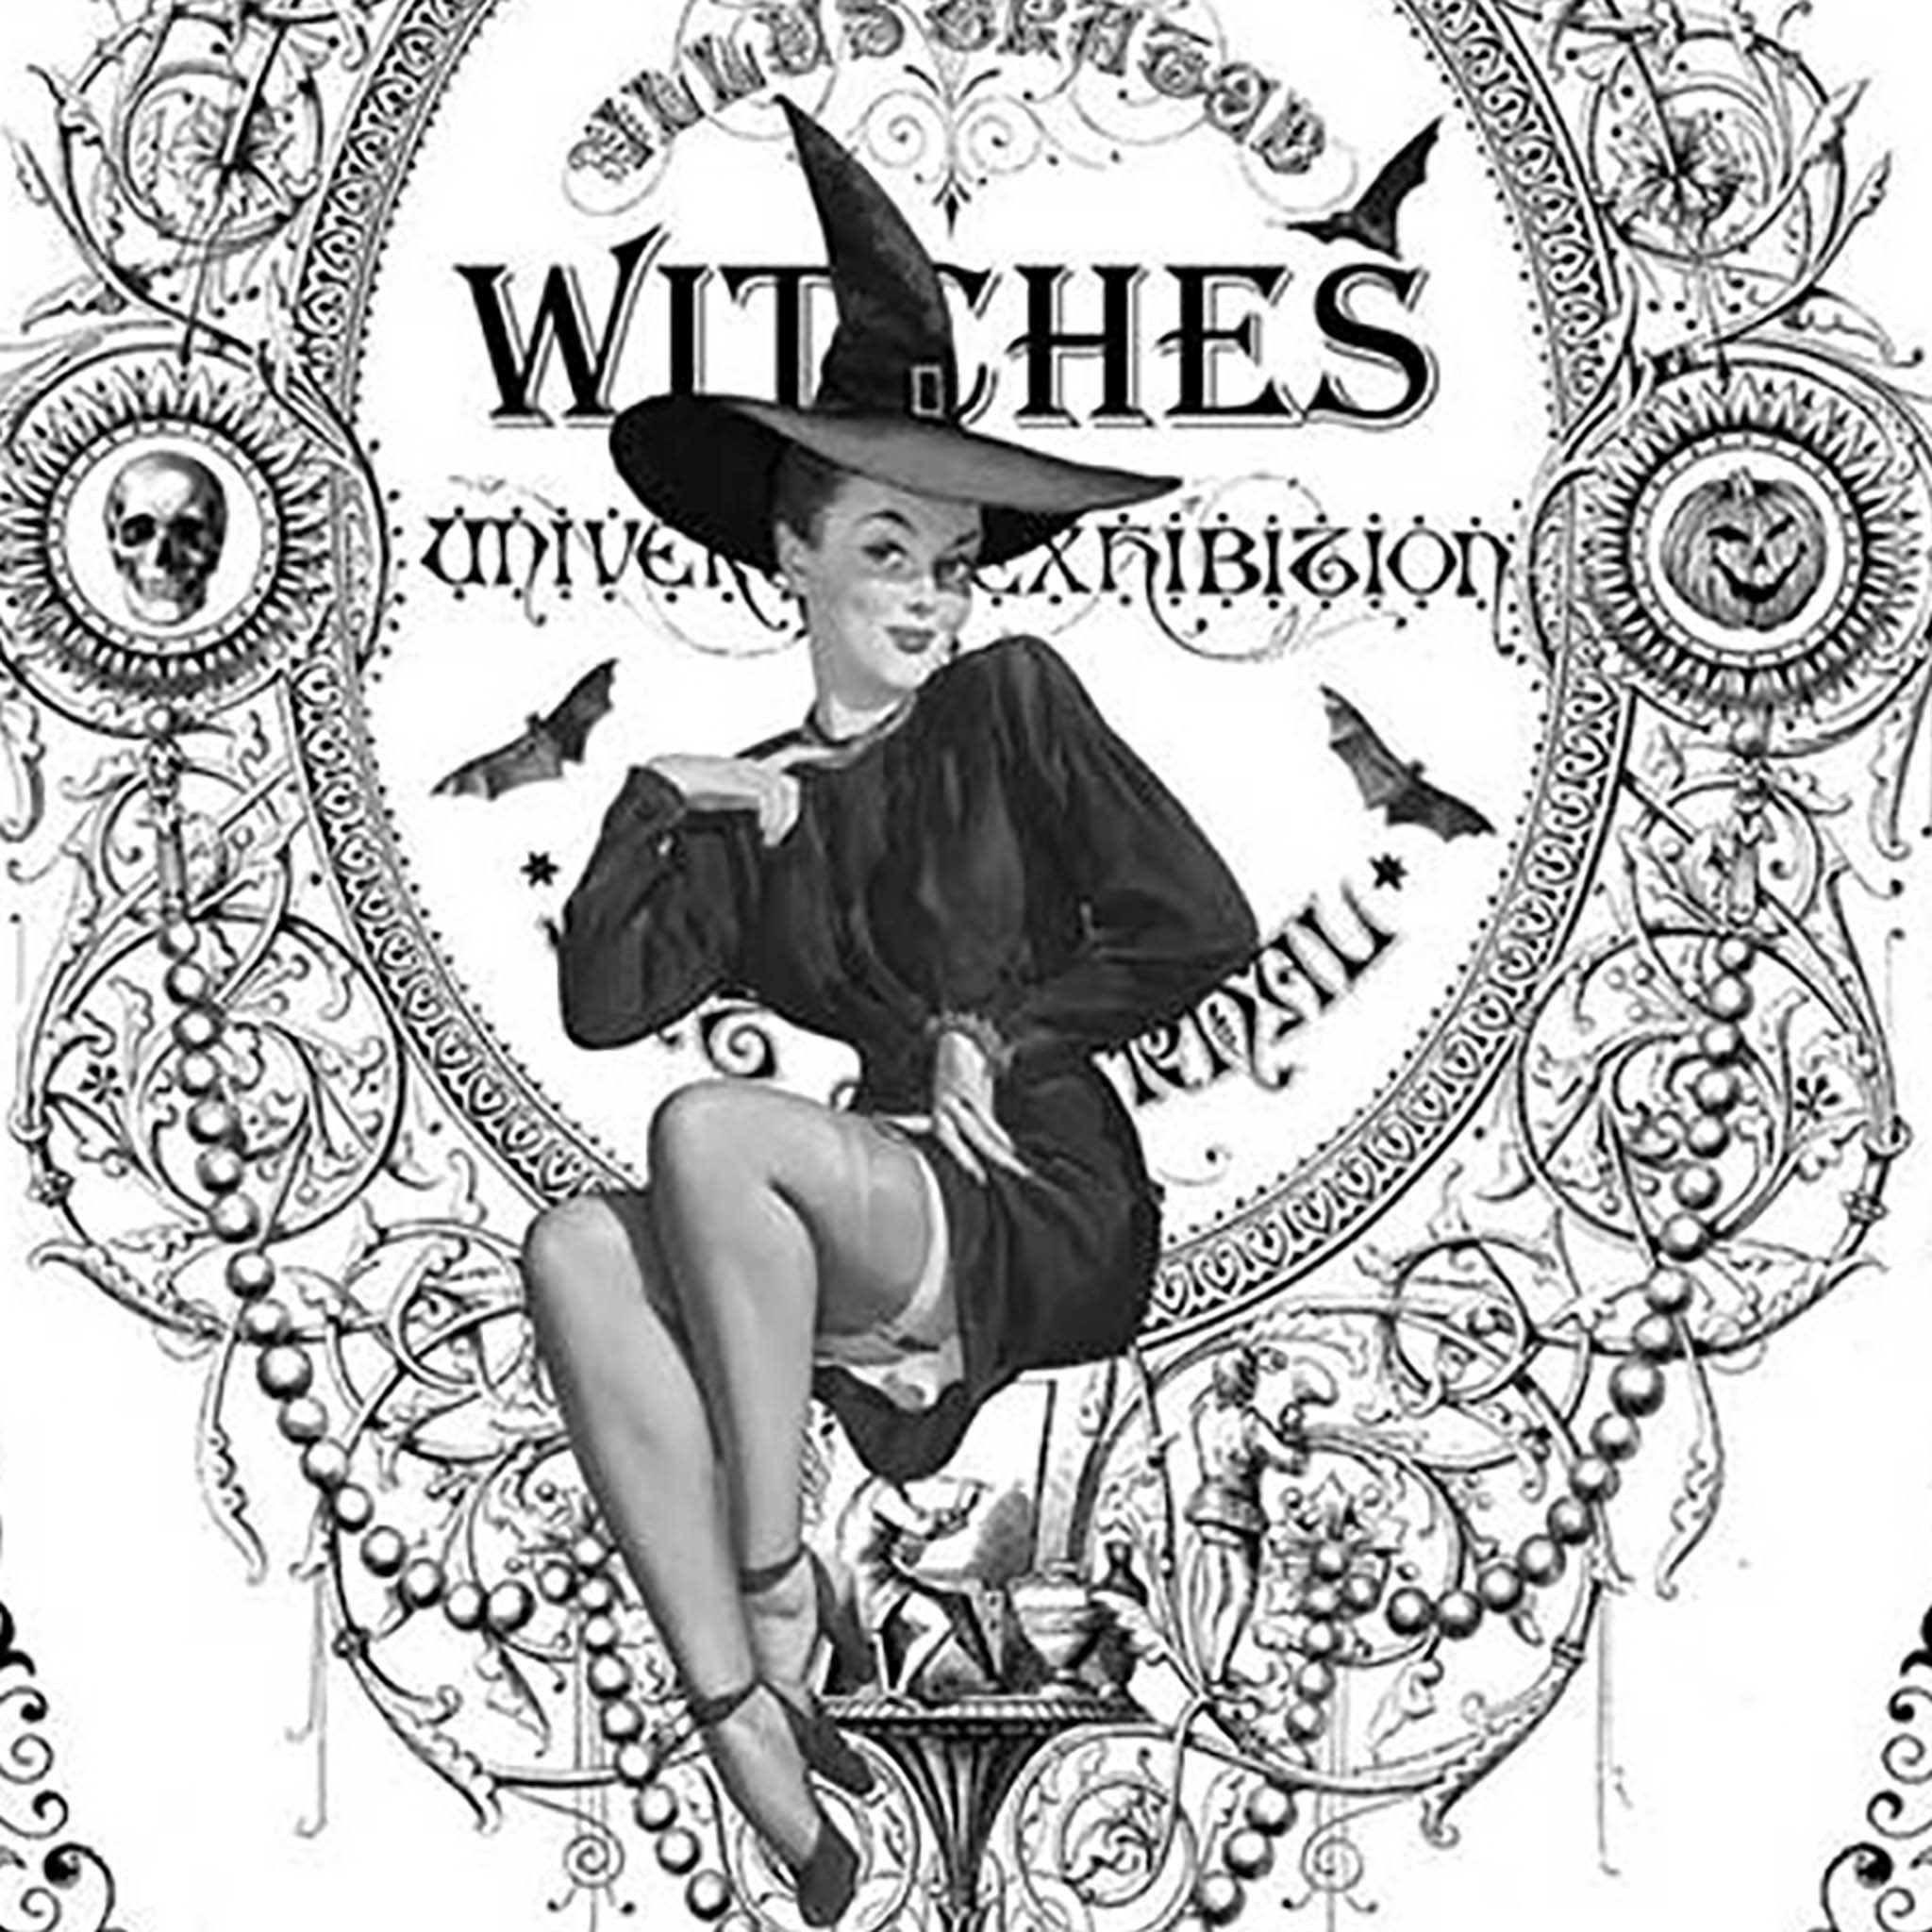 Close-up of an A3 rice paper design that features ornate corners with bats and spiders and a vintage style pinup witch sitting in a spooky ornate frame with the word "witches" behind her.